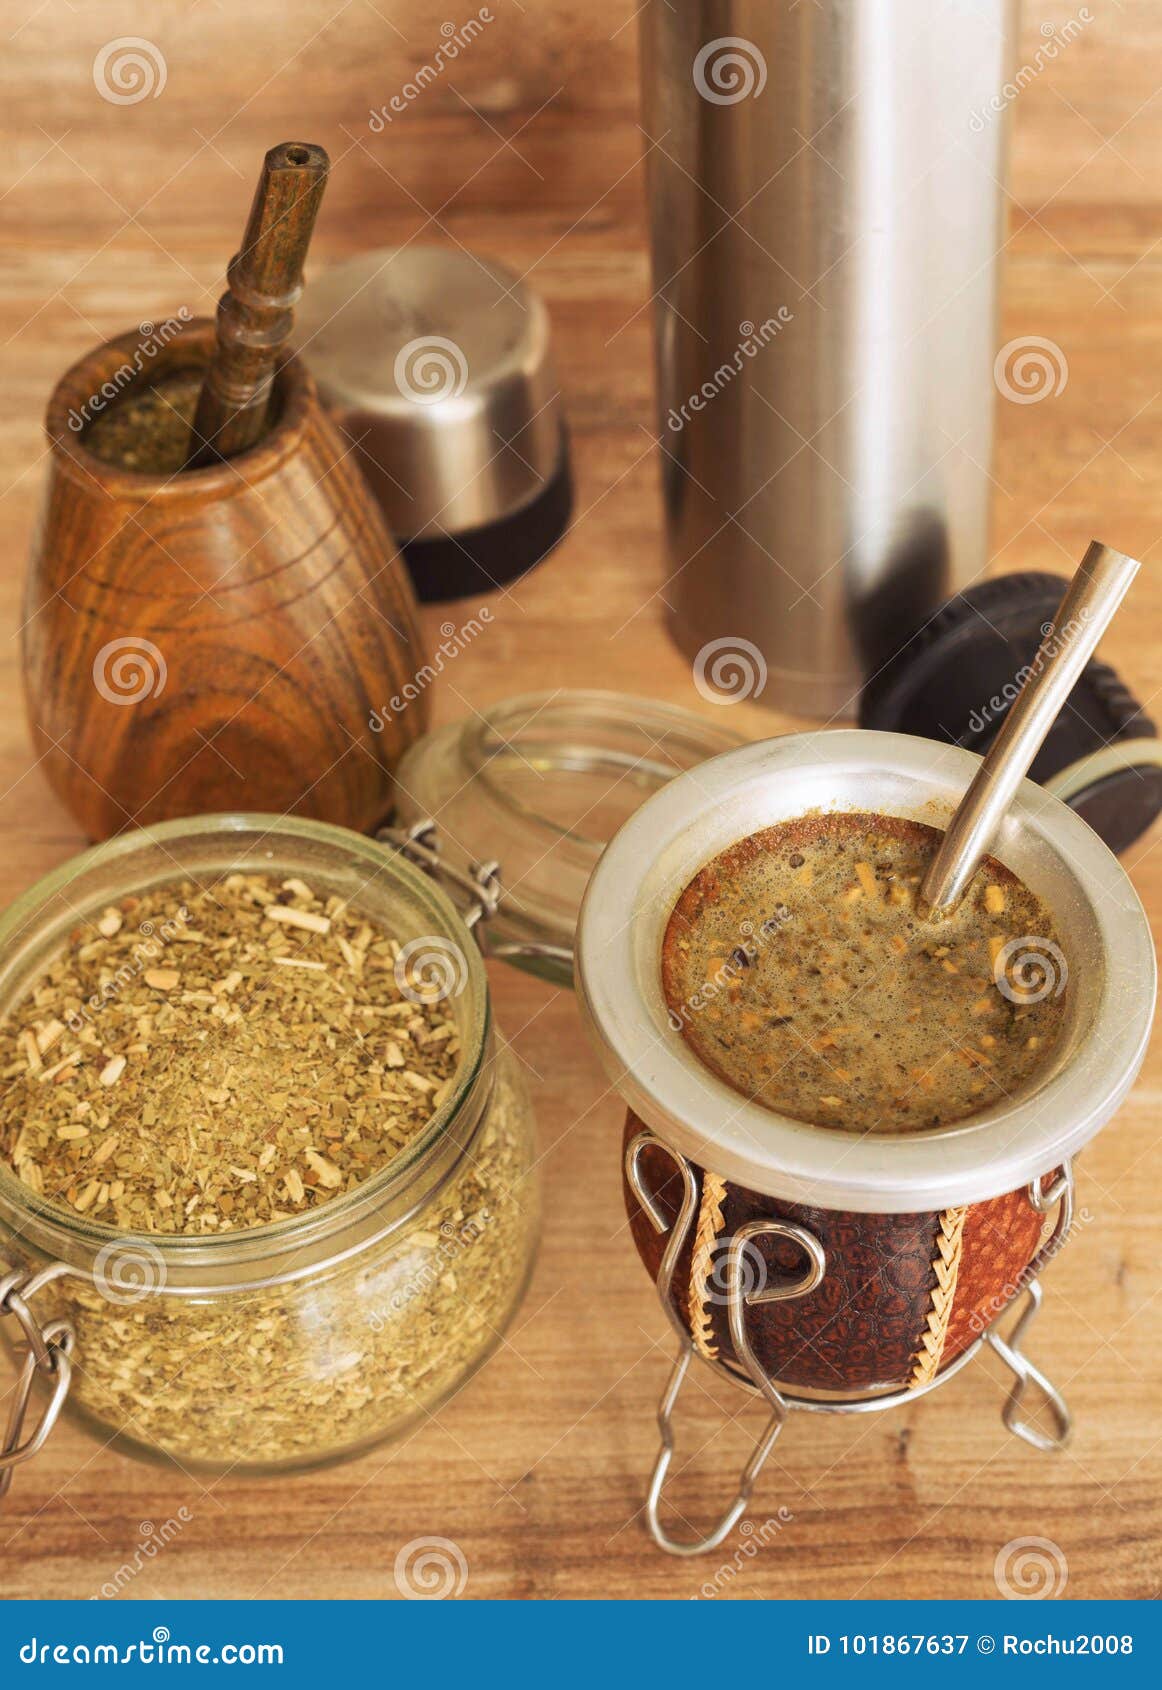 Yerba Mate: All you Need to Know about the South American Drink